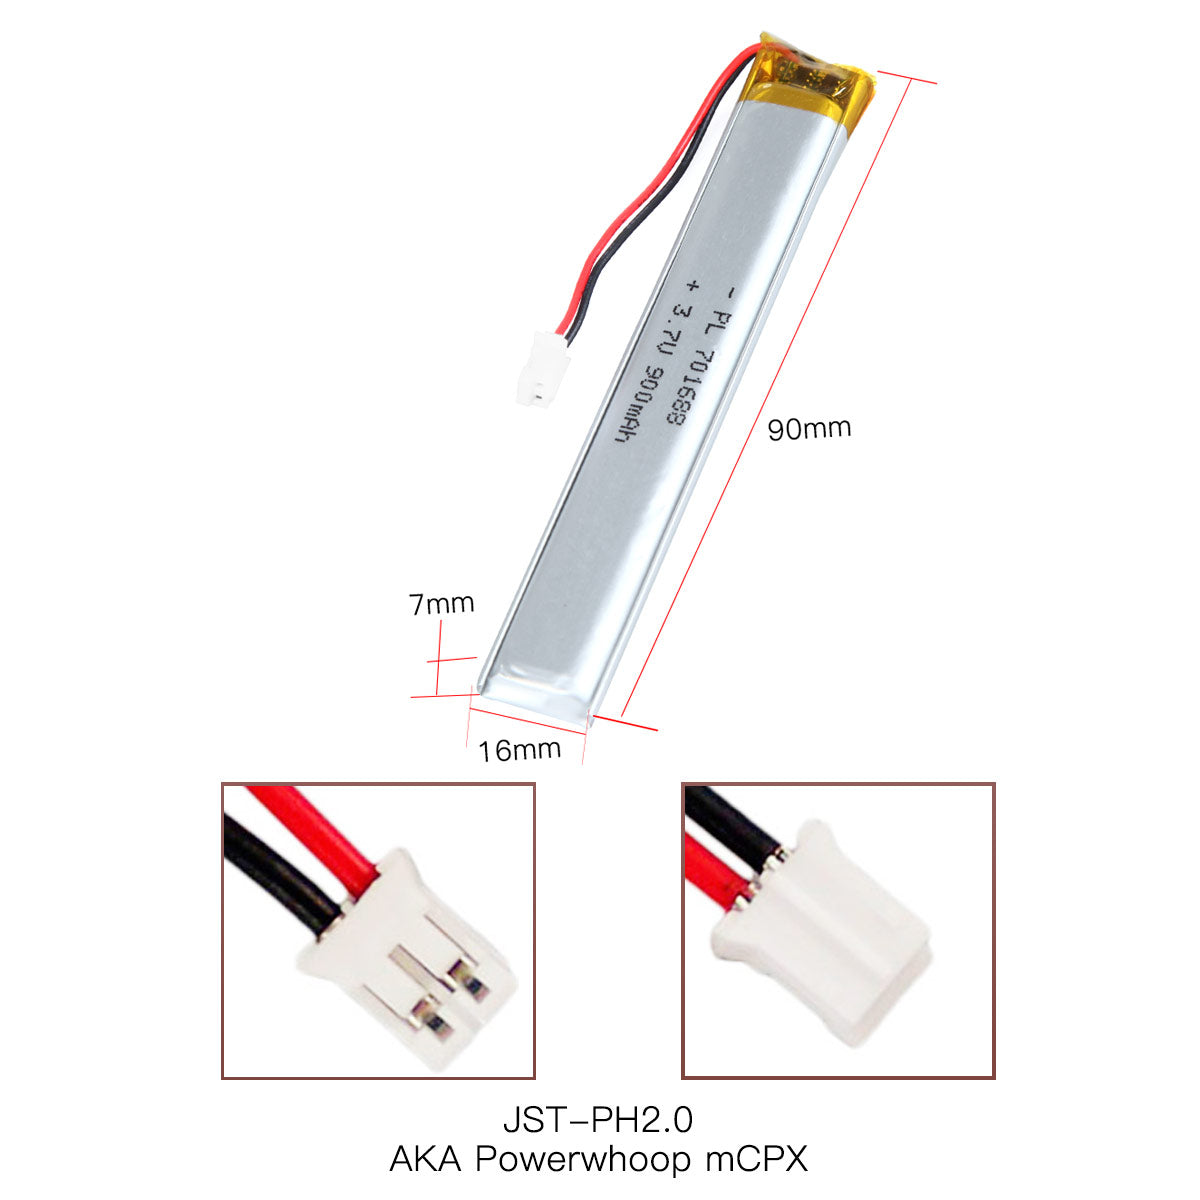 YDL 3.7V 900mAh 701688 Rechargeable Lithium Polymer Battery